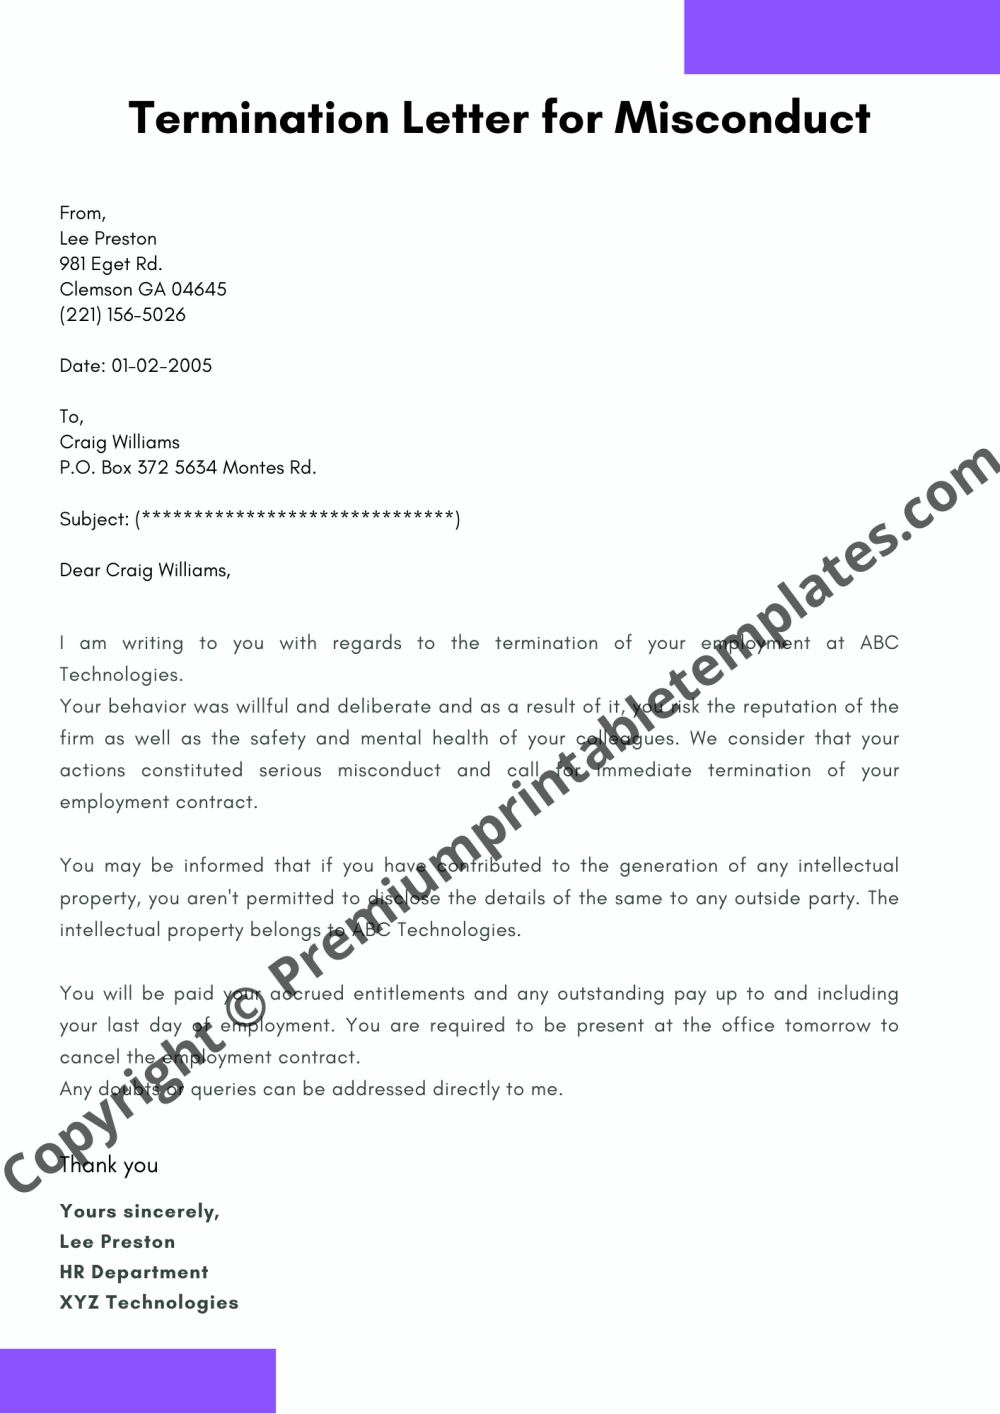 Sample Termination Letter for Misconduct